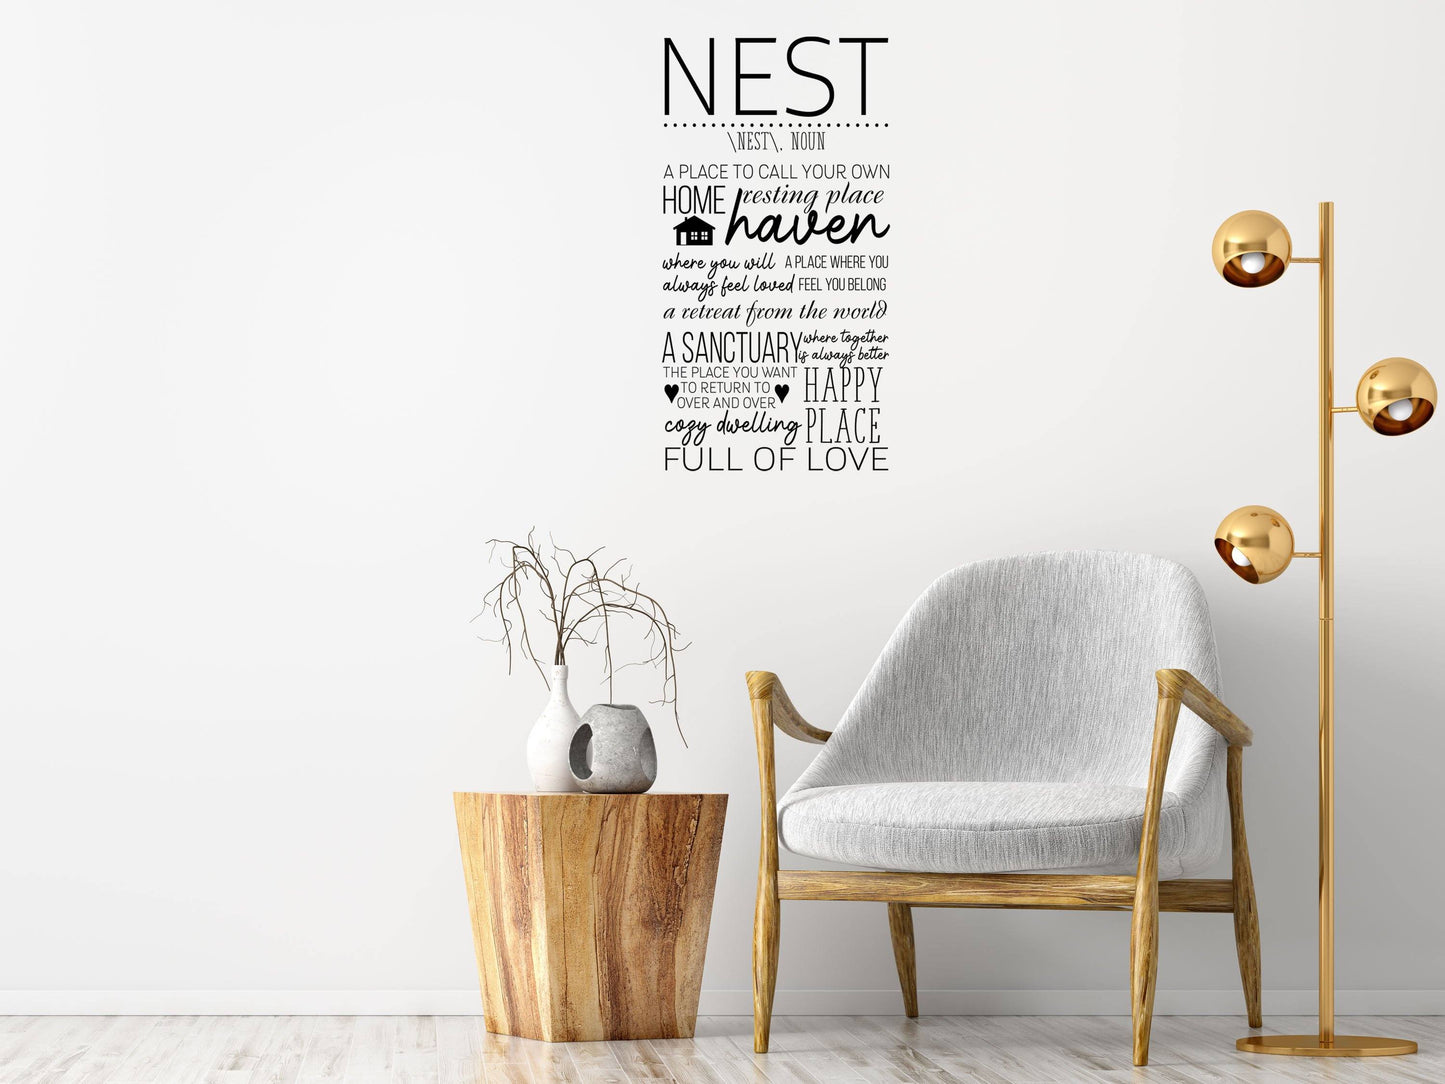 Nest Wall Decal - Nest Vinyl Decal - Nest Wall Decal - Cute Home Decor - Nest Definition Decal Vinyl Wall Decal Done 